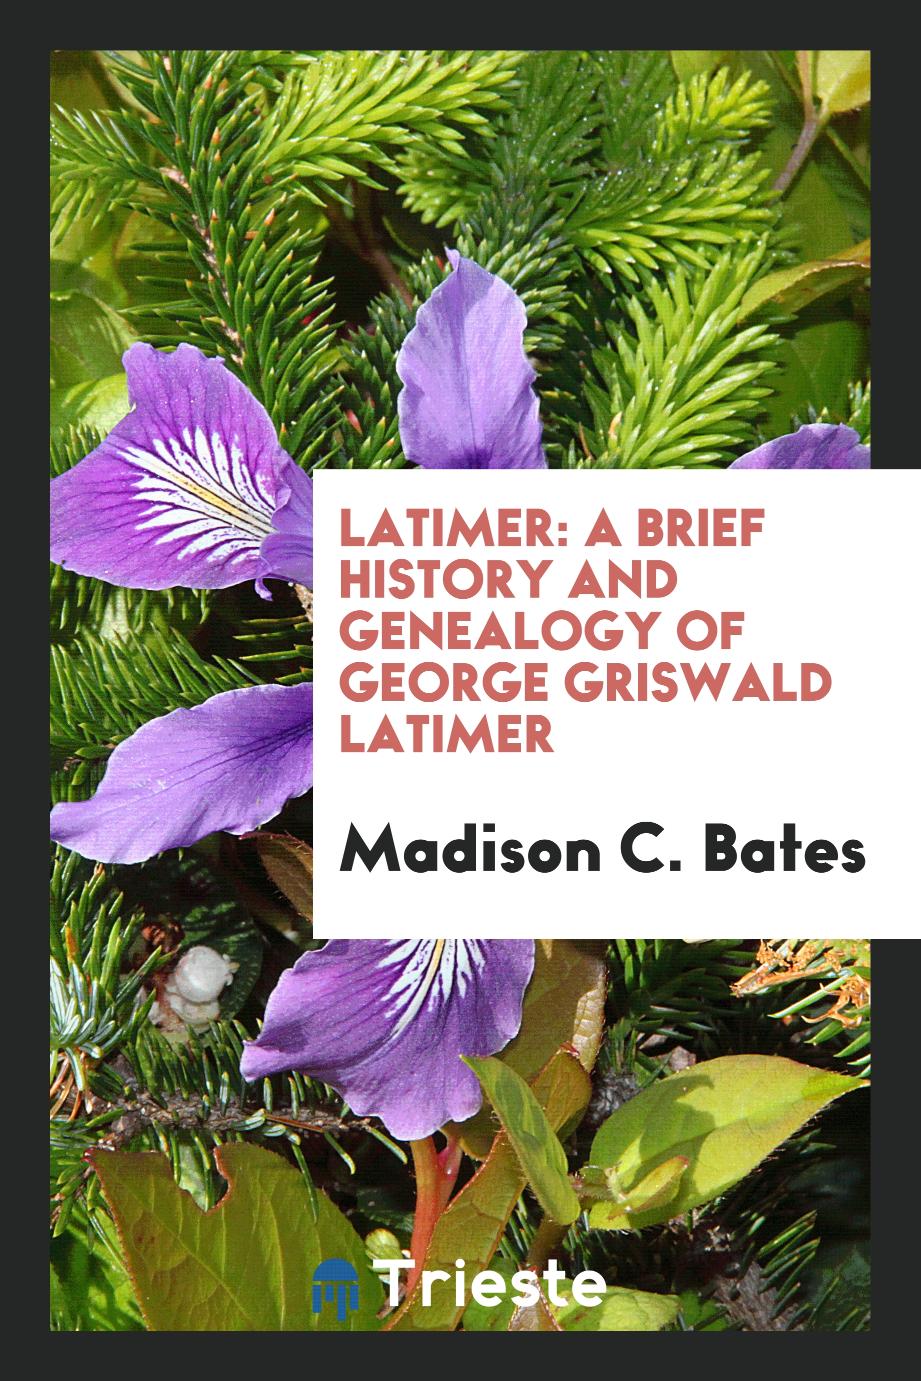 Latimer: a brief history and genealogy of George Griswald Latimer